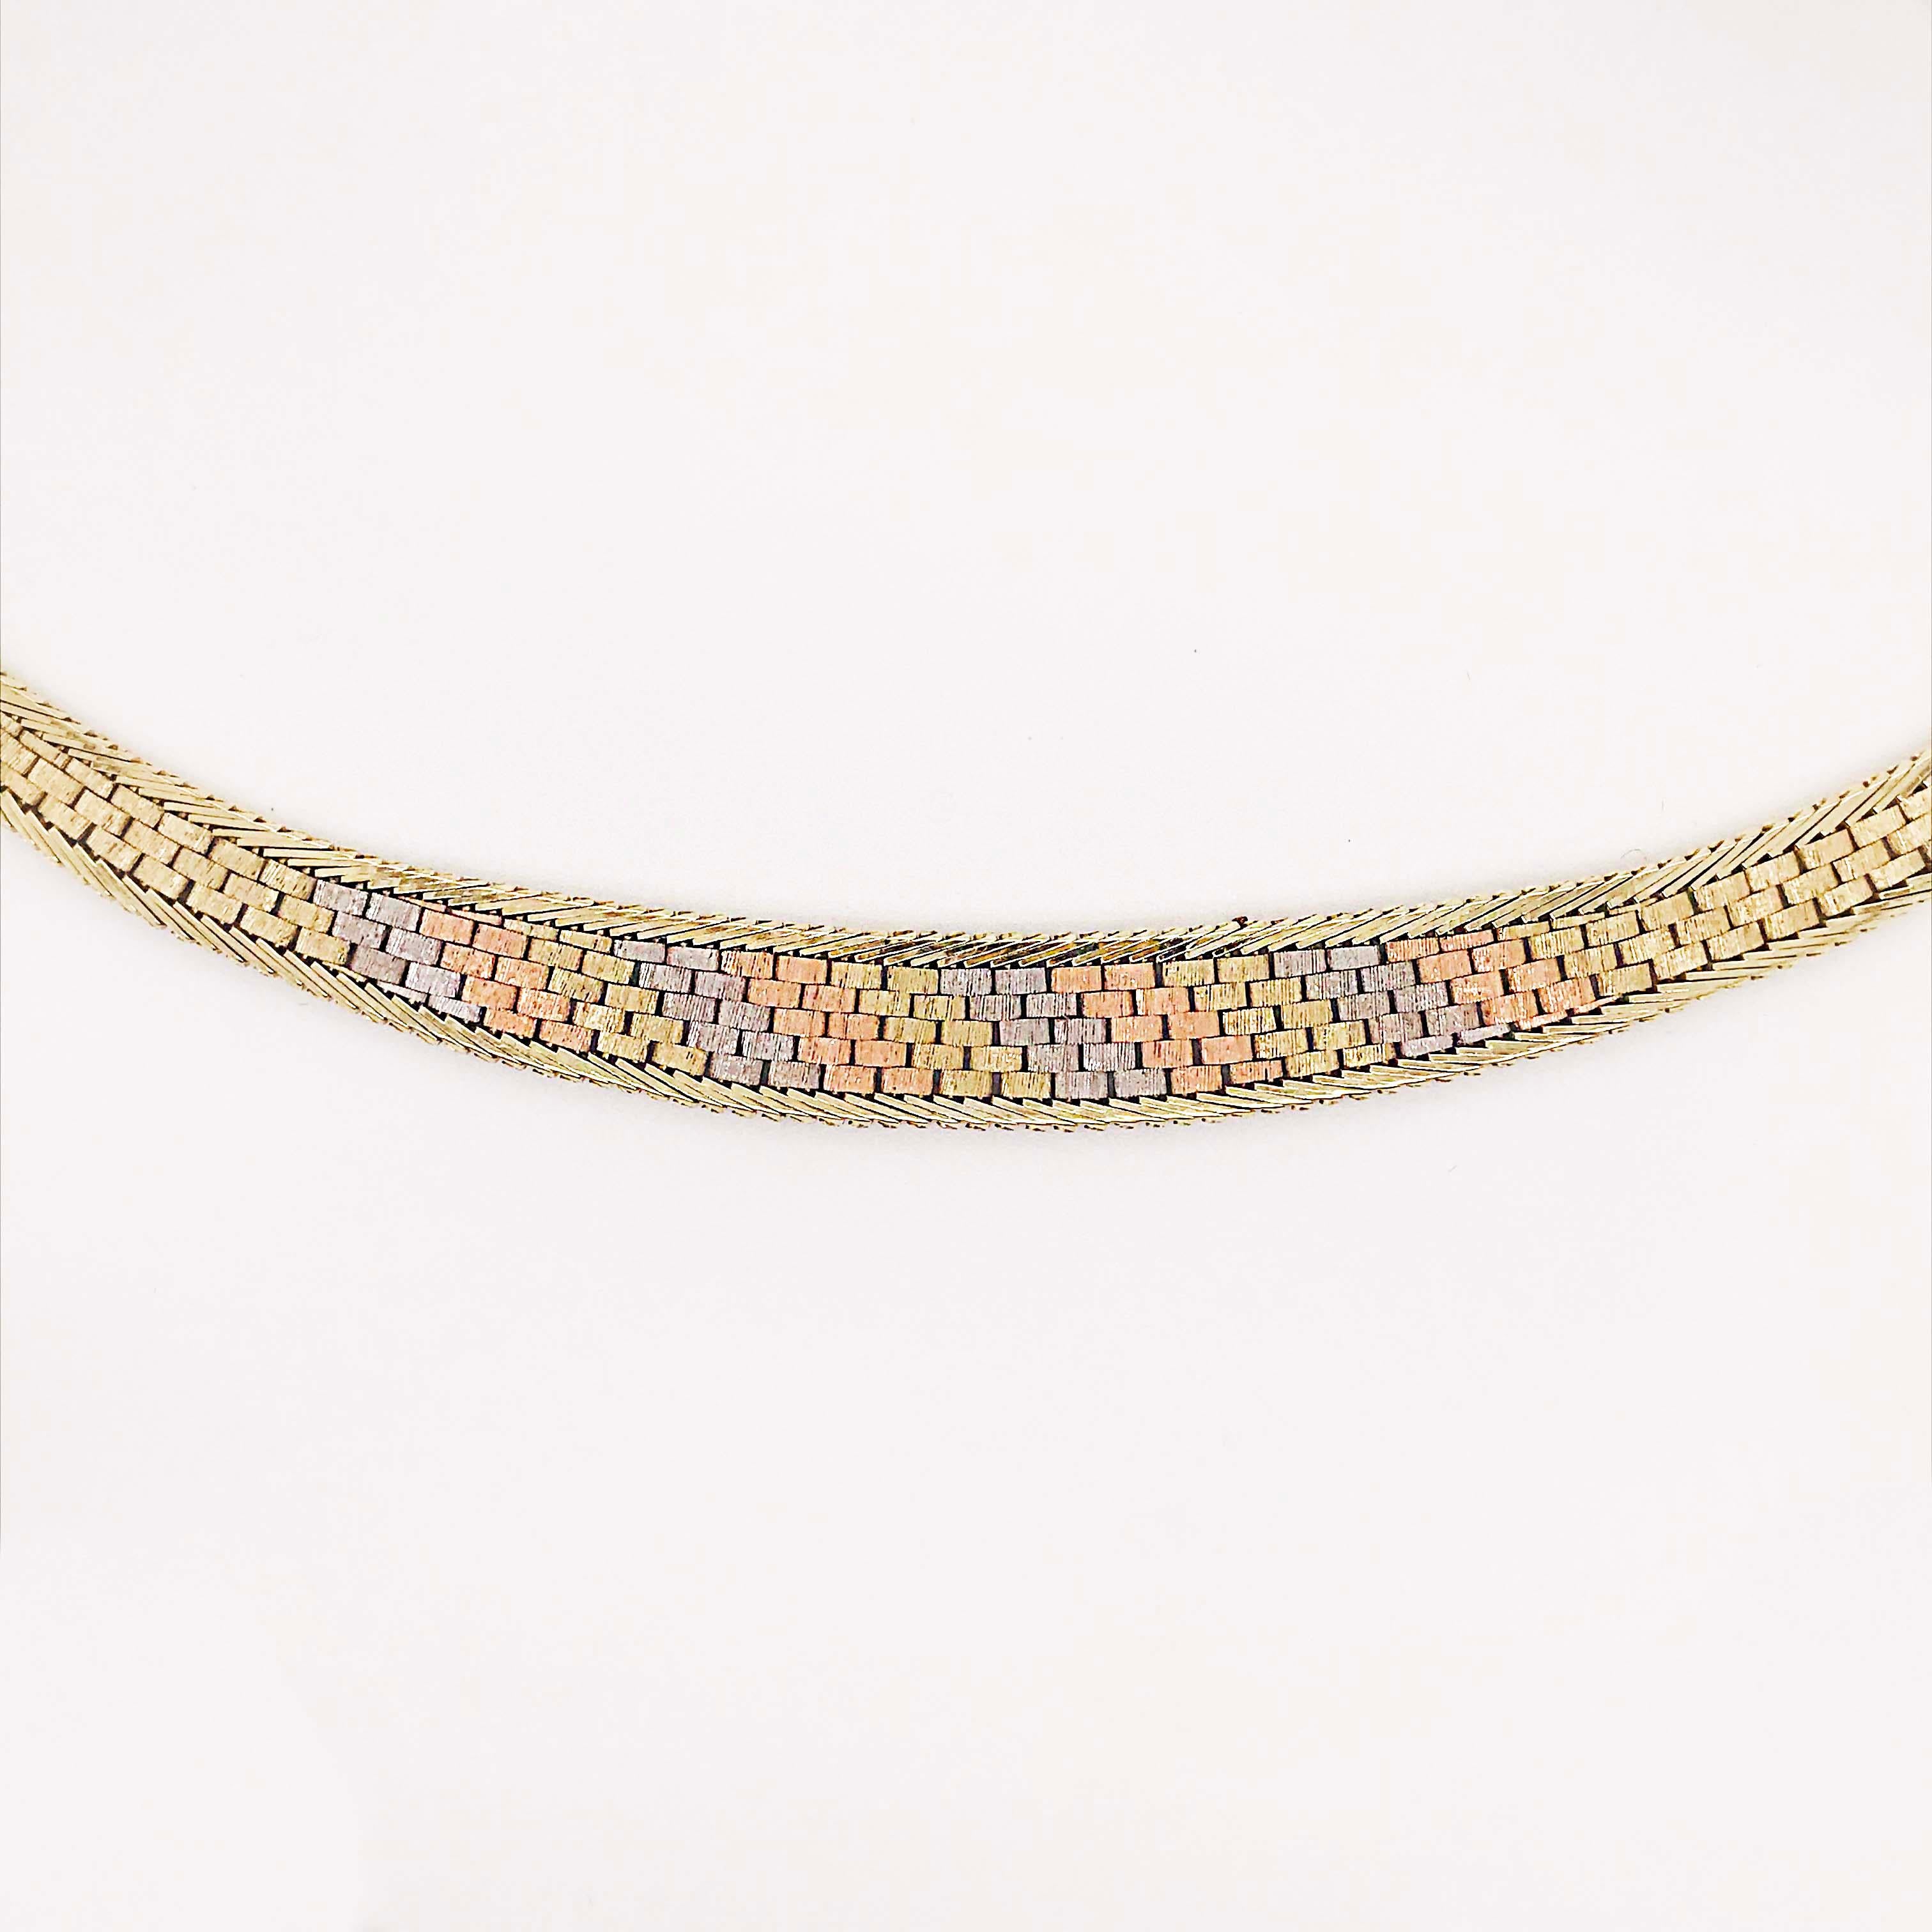 Artisan Mixed Metal Necklace, Gold Link Chain Choker, 14K Yellow, White, Rose Gold